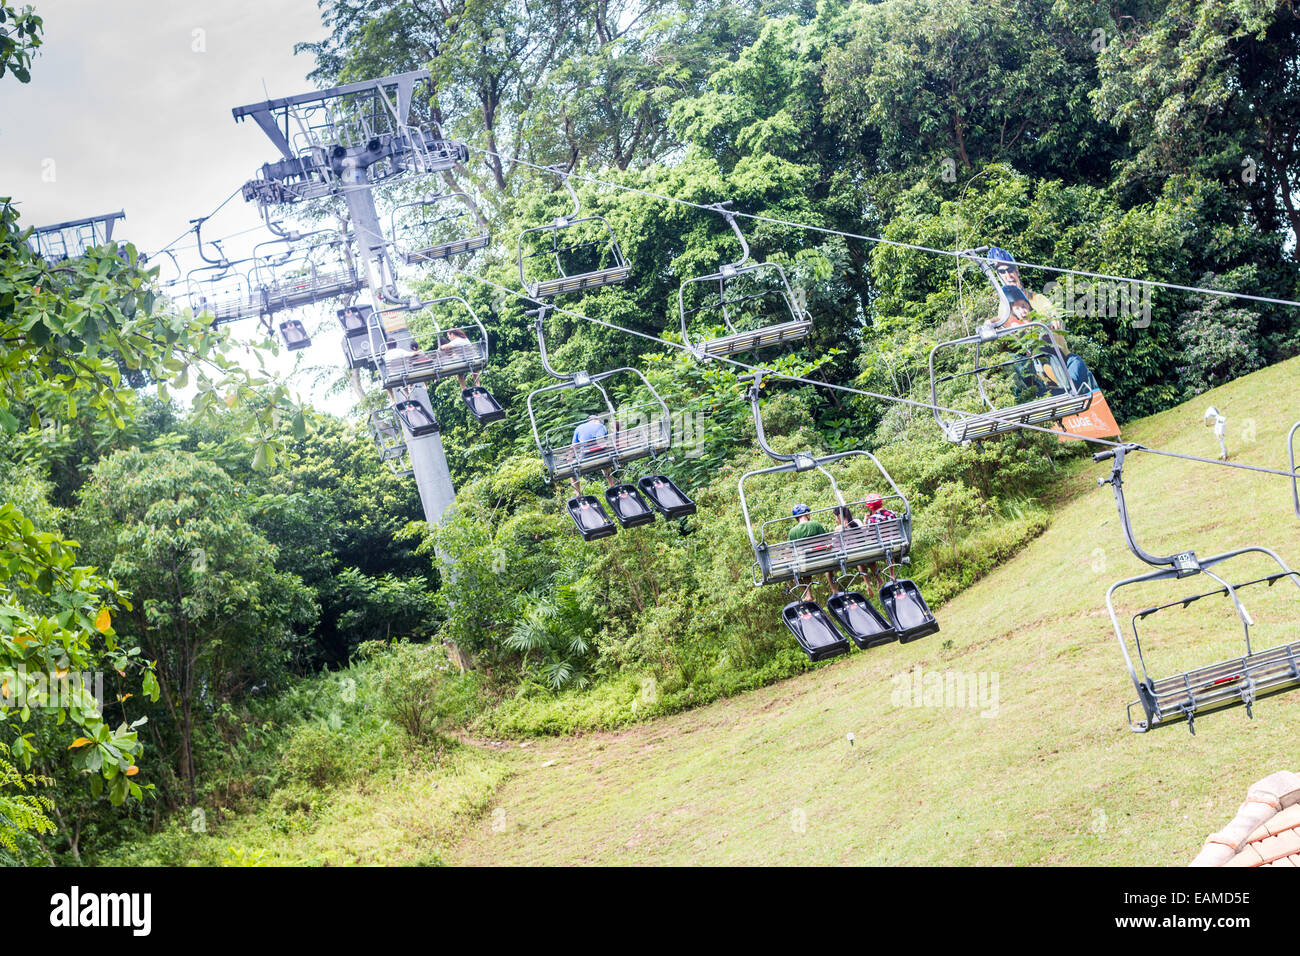 Luge chairlift at Sentosa Island Singapore Stock Photo